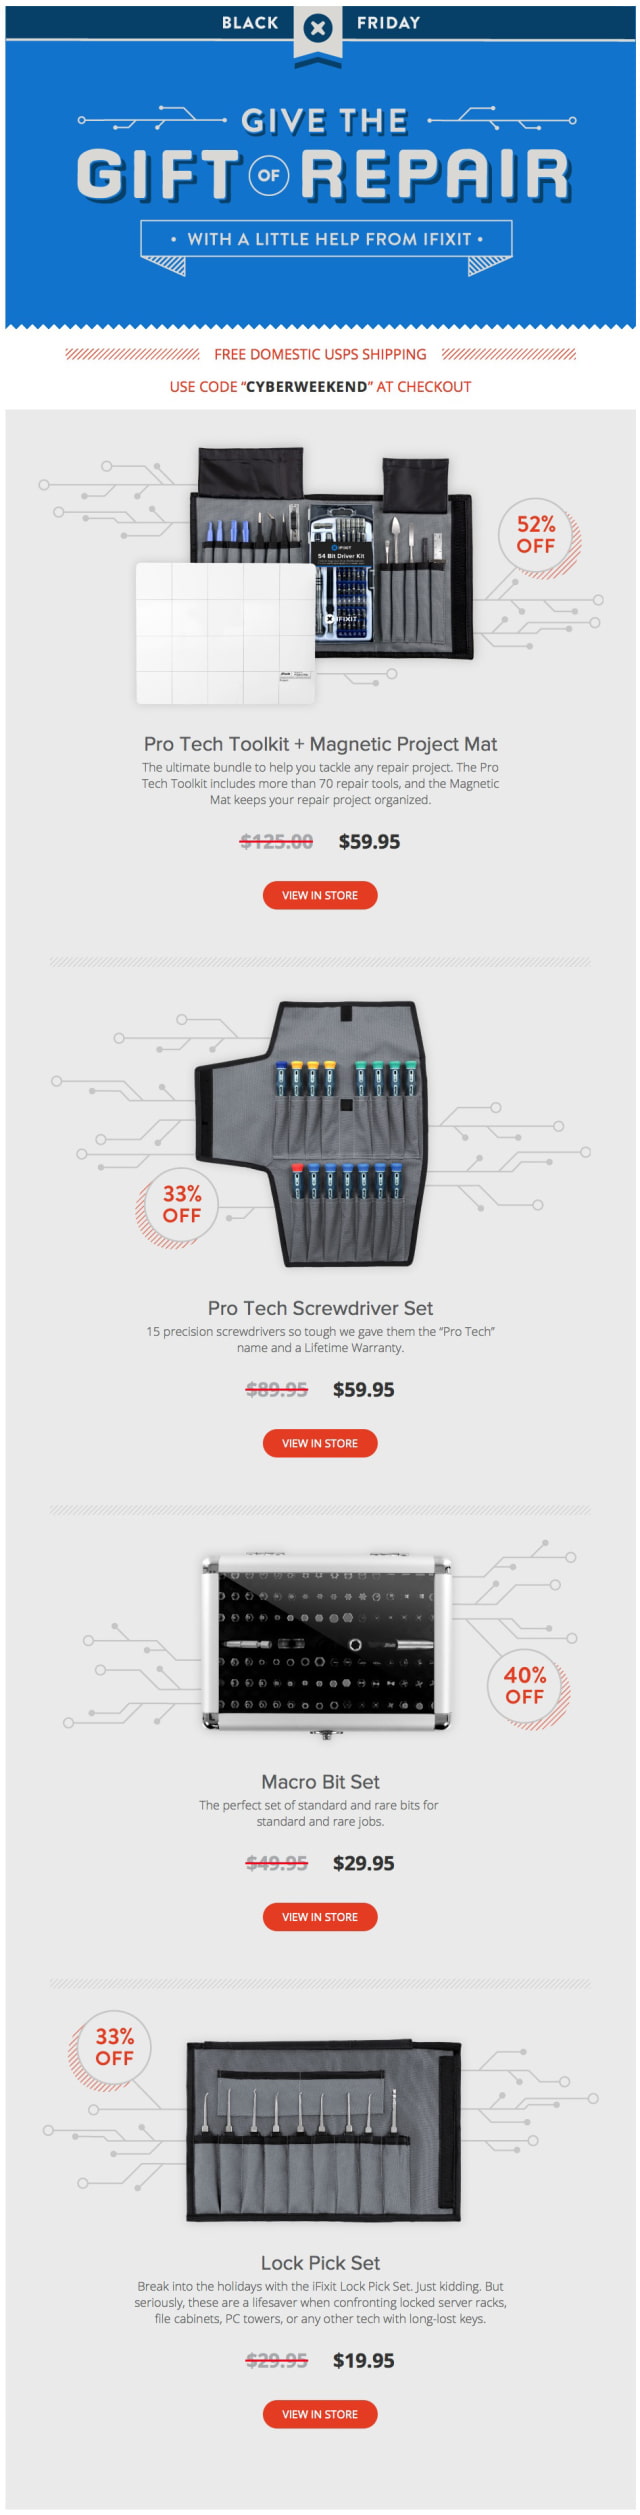 iFixit Toolkits Are On Sale for Black Friday